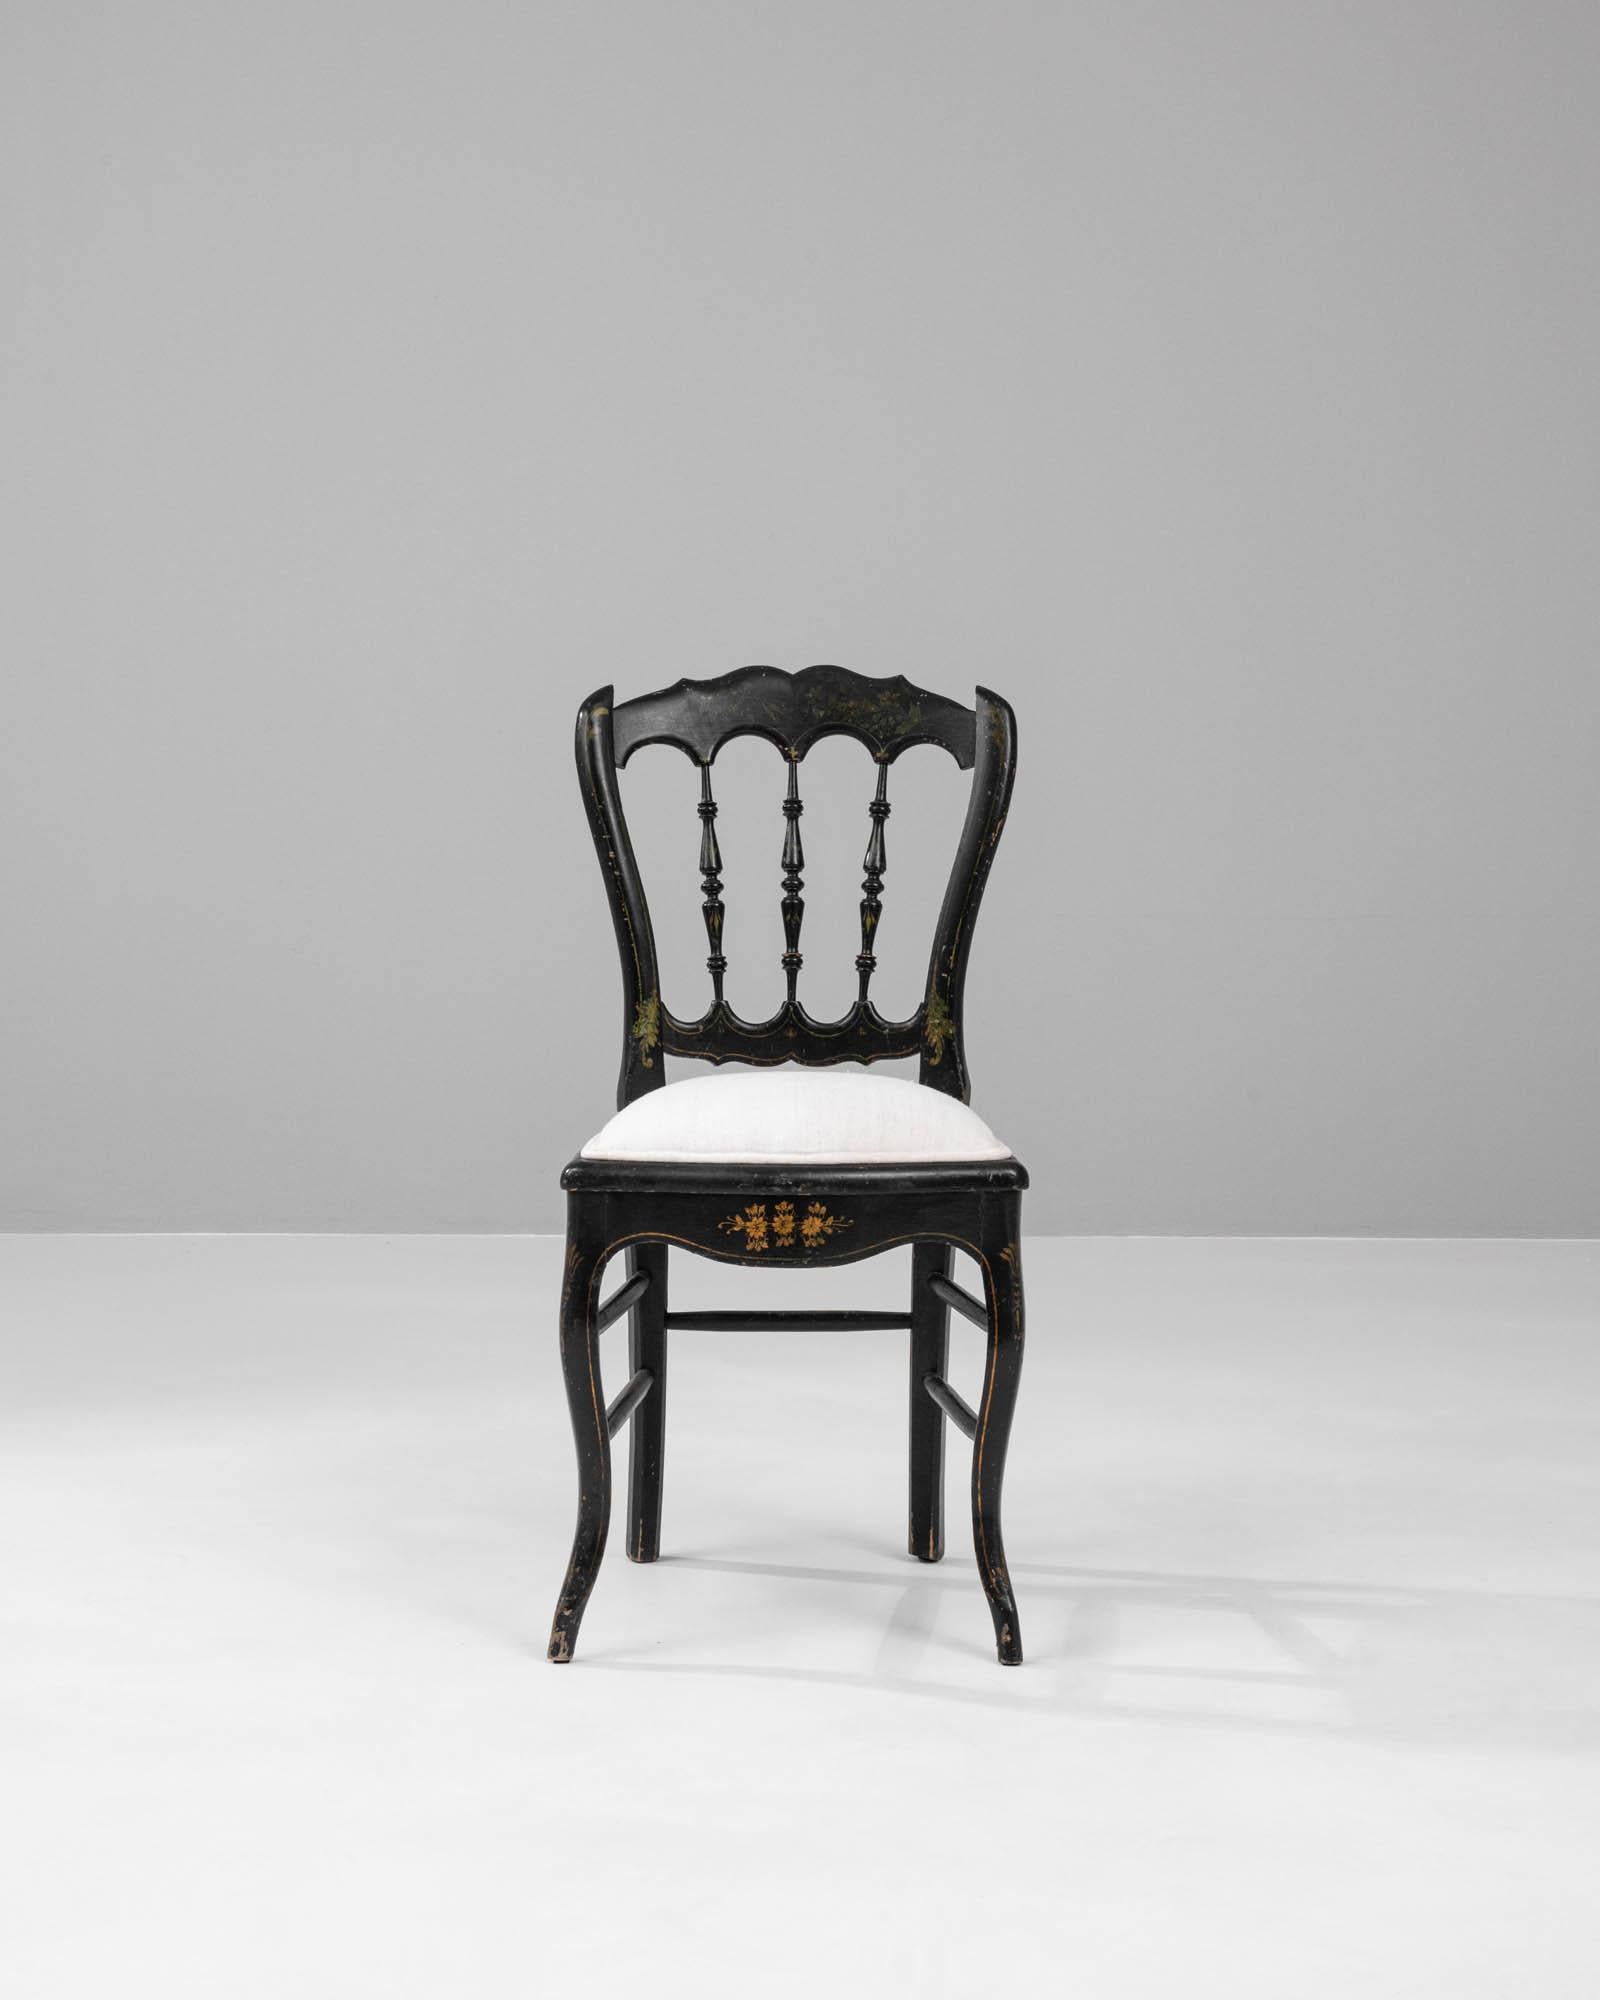 This 1880s French wooden chair with an upholstered seat is a beautiful example of the opulent design of the late 19th century. The chair's ebony-hued frame is gracefully adorned with golden floral motifs, their intricate details glistening against